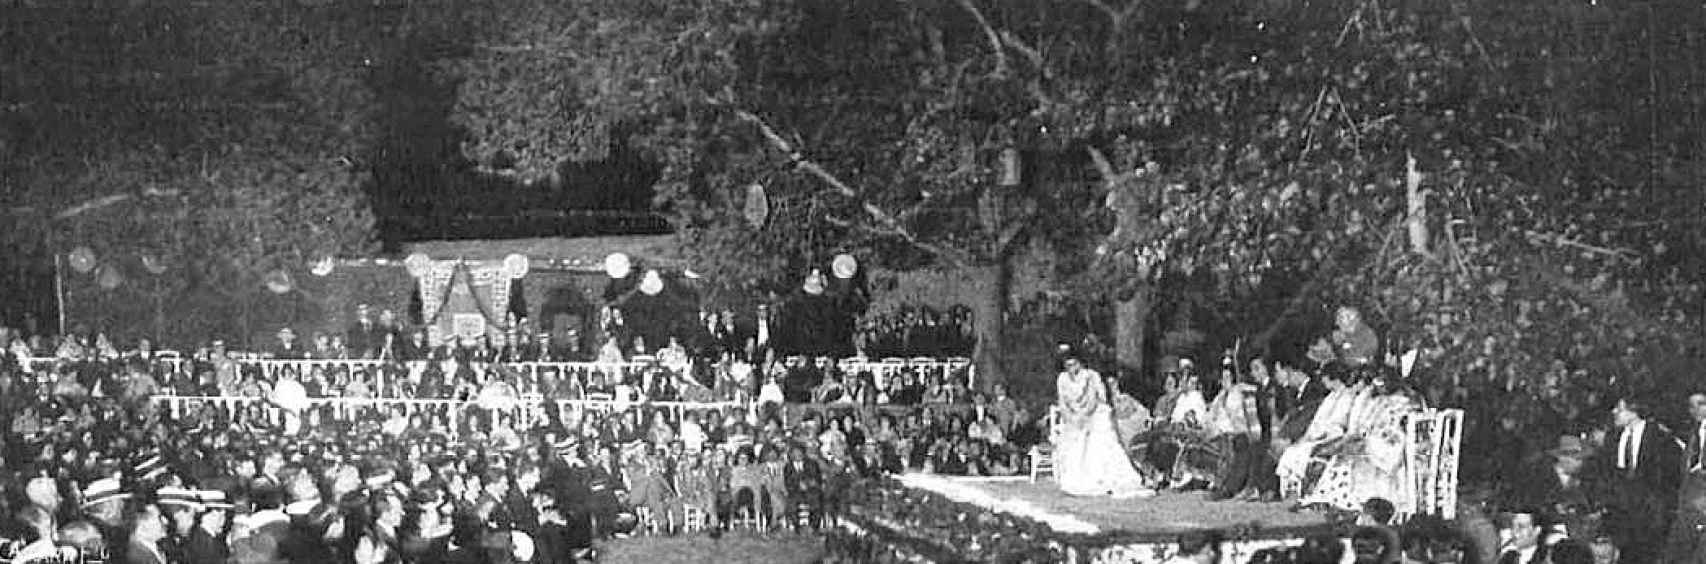 Cante Jondo Competition of 1922